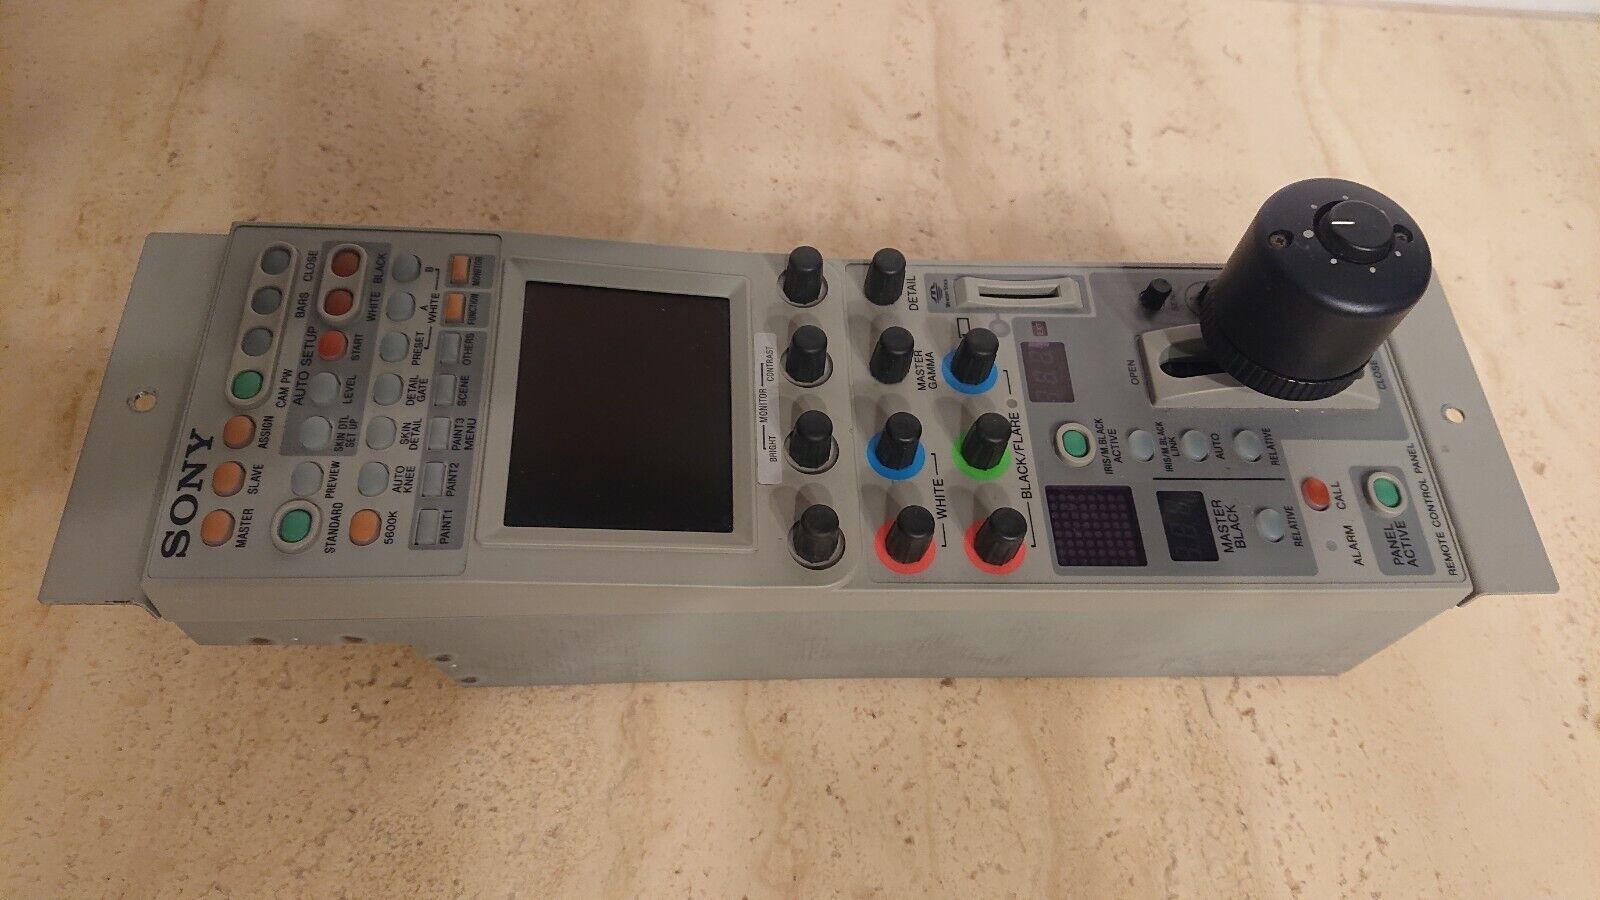 Sony RCP-D50 Joystick Remote Control panel for CCU